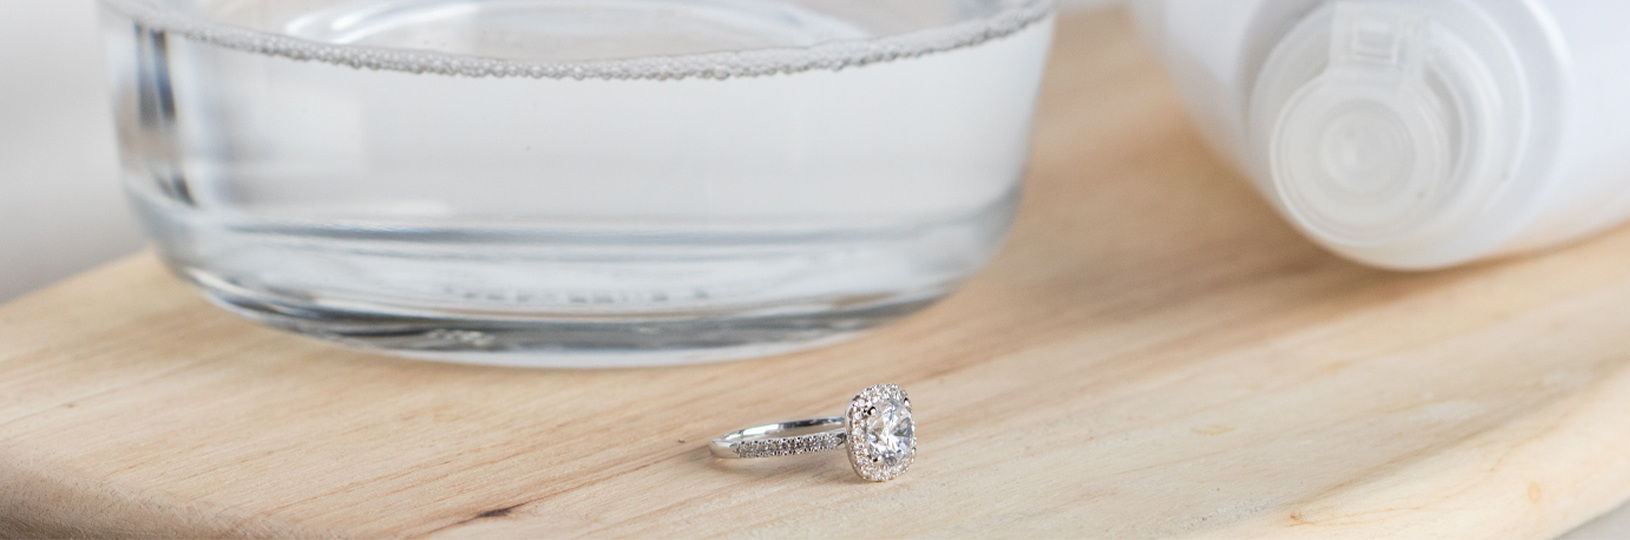 Clean Your Diamond Ring! Jewelry Cleaning Ideas That Save Time & Money! ( Clean My Space) 